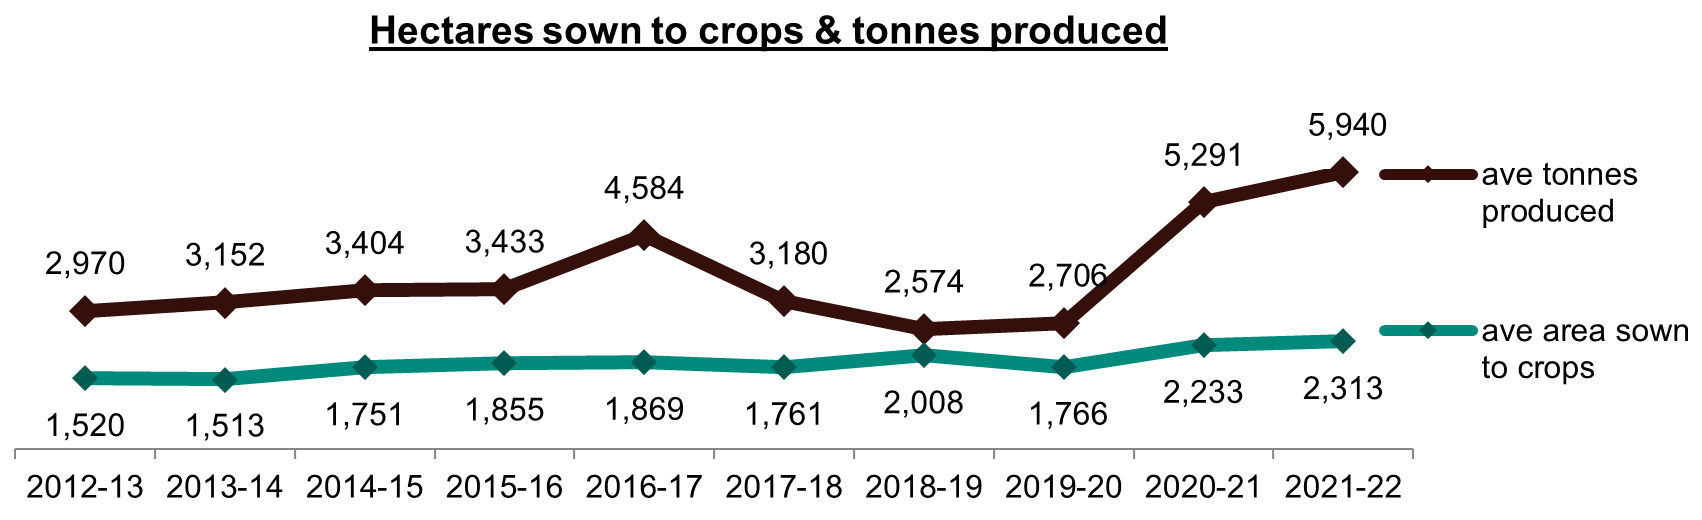 Hectares sown to crops and tonnes produced